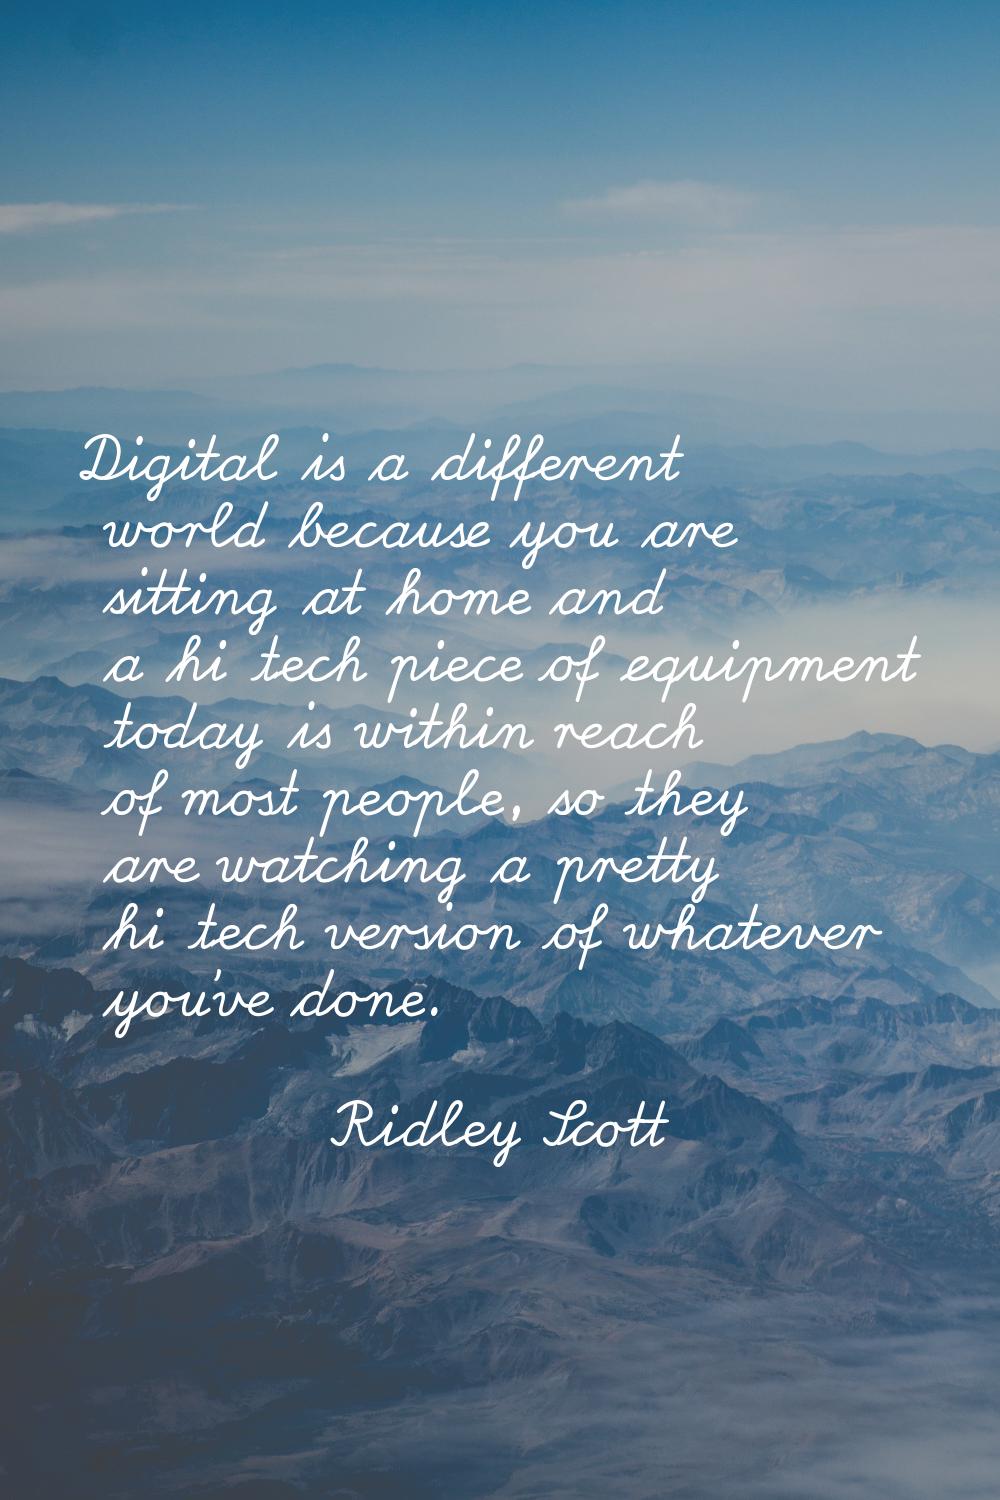 Digital is a different world because you are sitting at home and a hi tech piece of equipment today